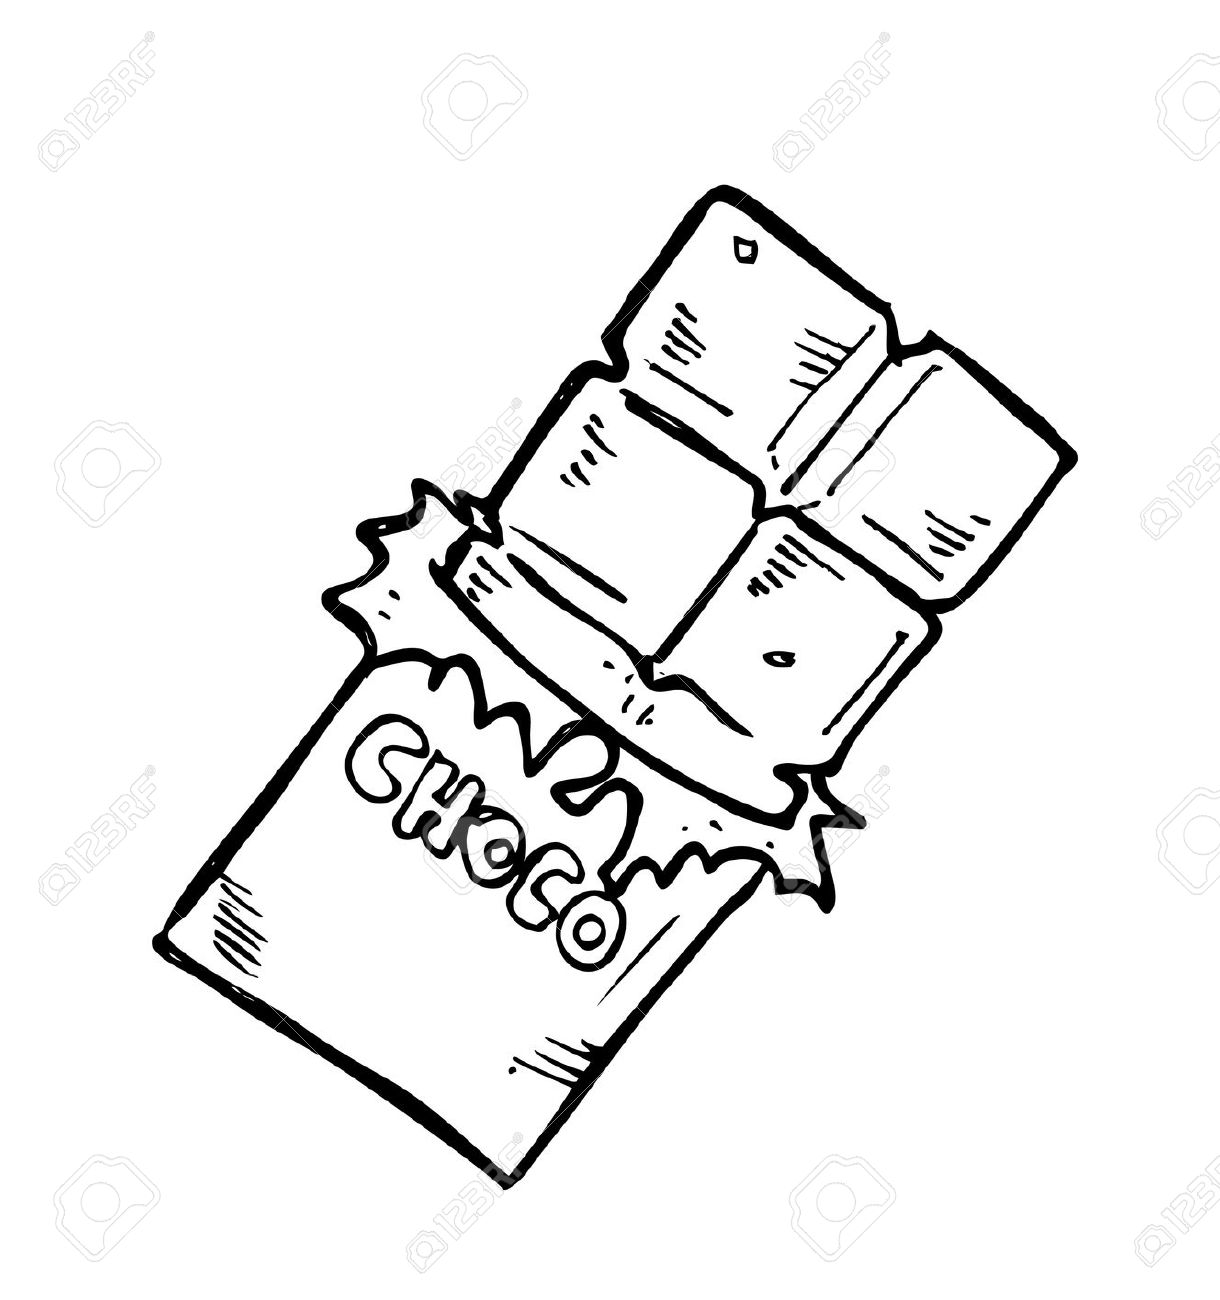 Chocolate clipart black and white, Chocolate black and white